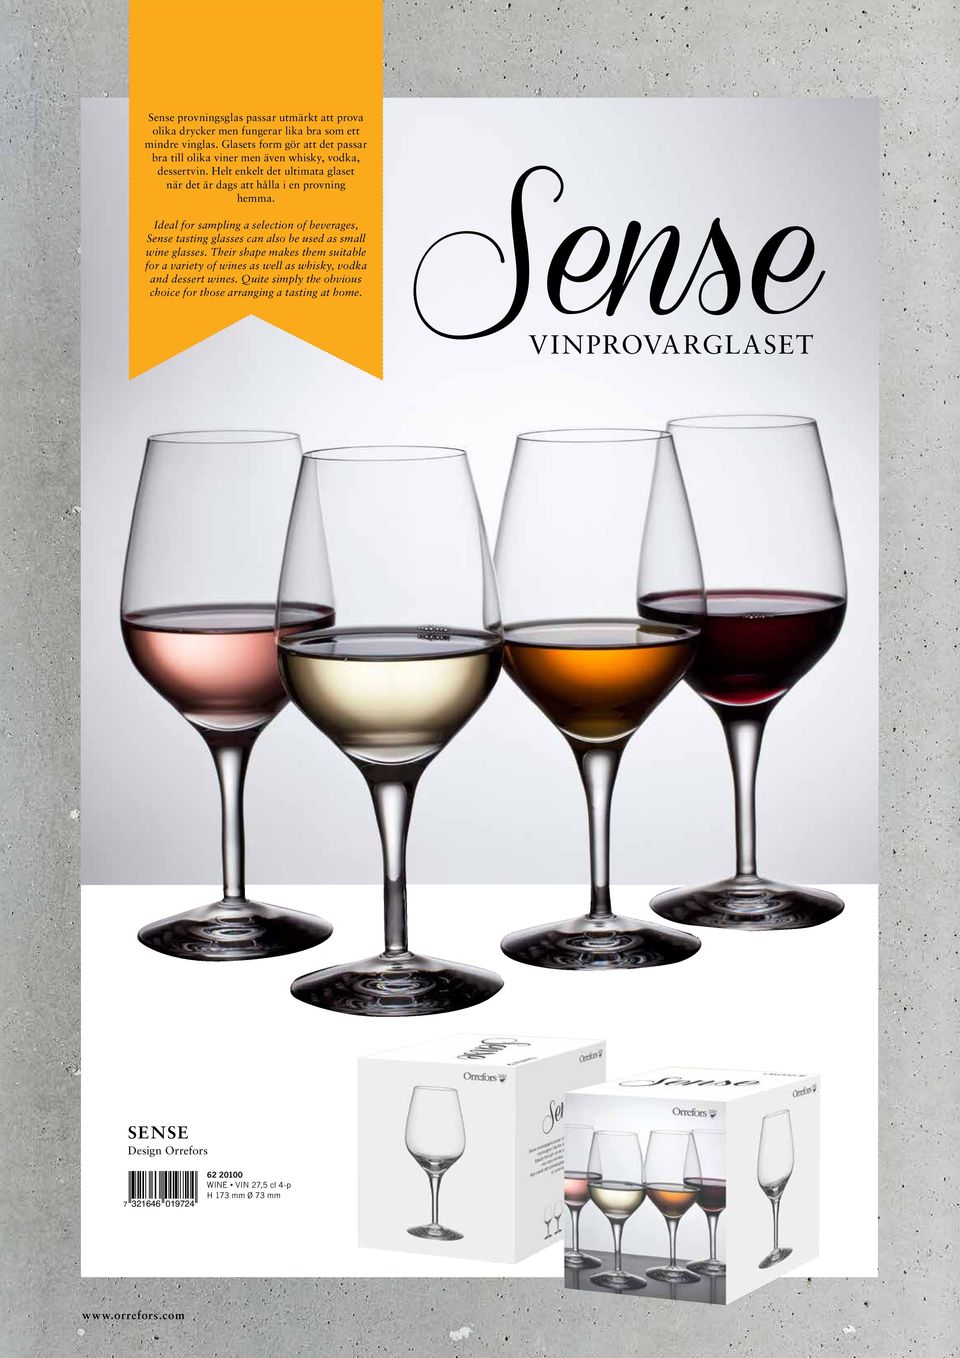 Ideal for sampling a selection of beverages, Sense tasting glasses can also be used as small wine glasses.